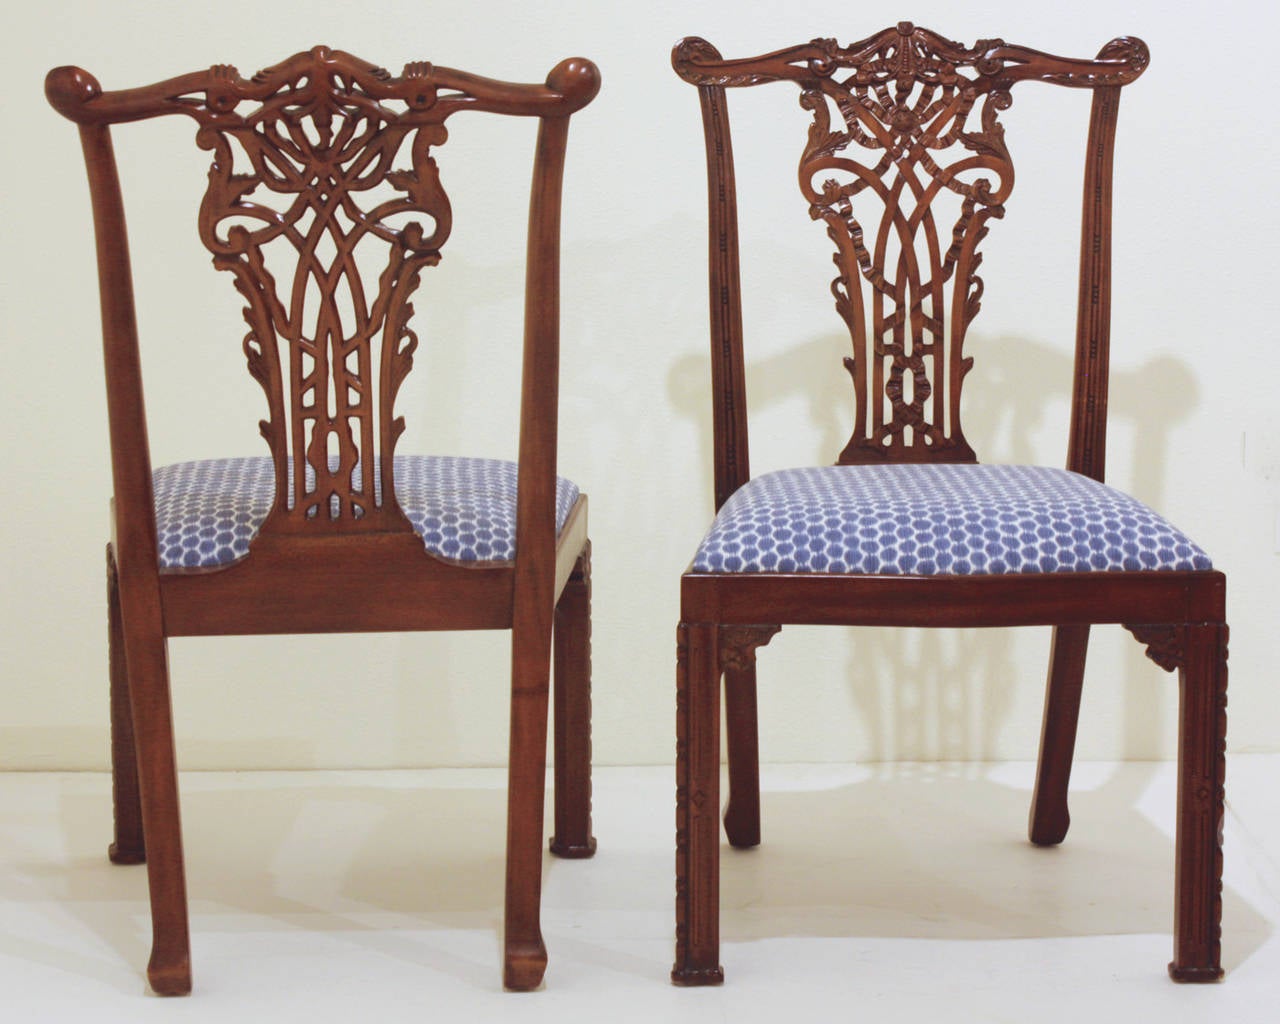 Set of 16 mahogany dining chairs, Chippendale style with ribband backs and Marlborough legs with blind fretwork by Maitland-Smith